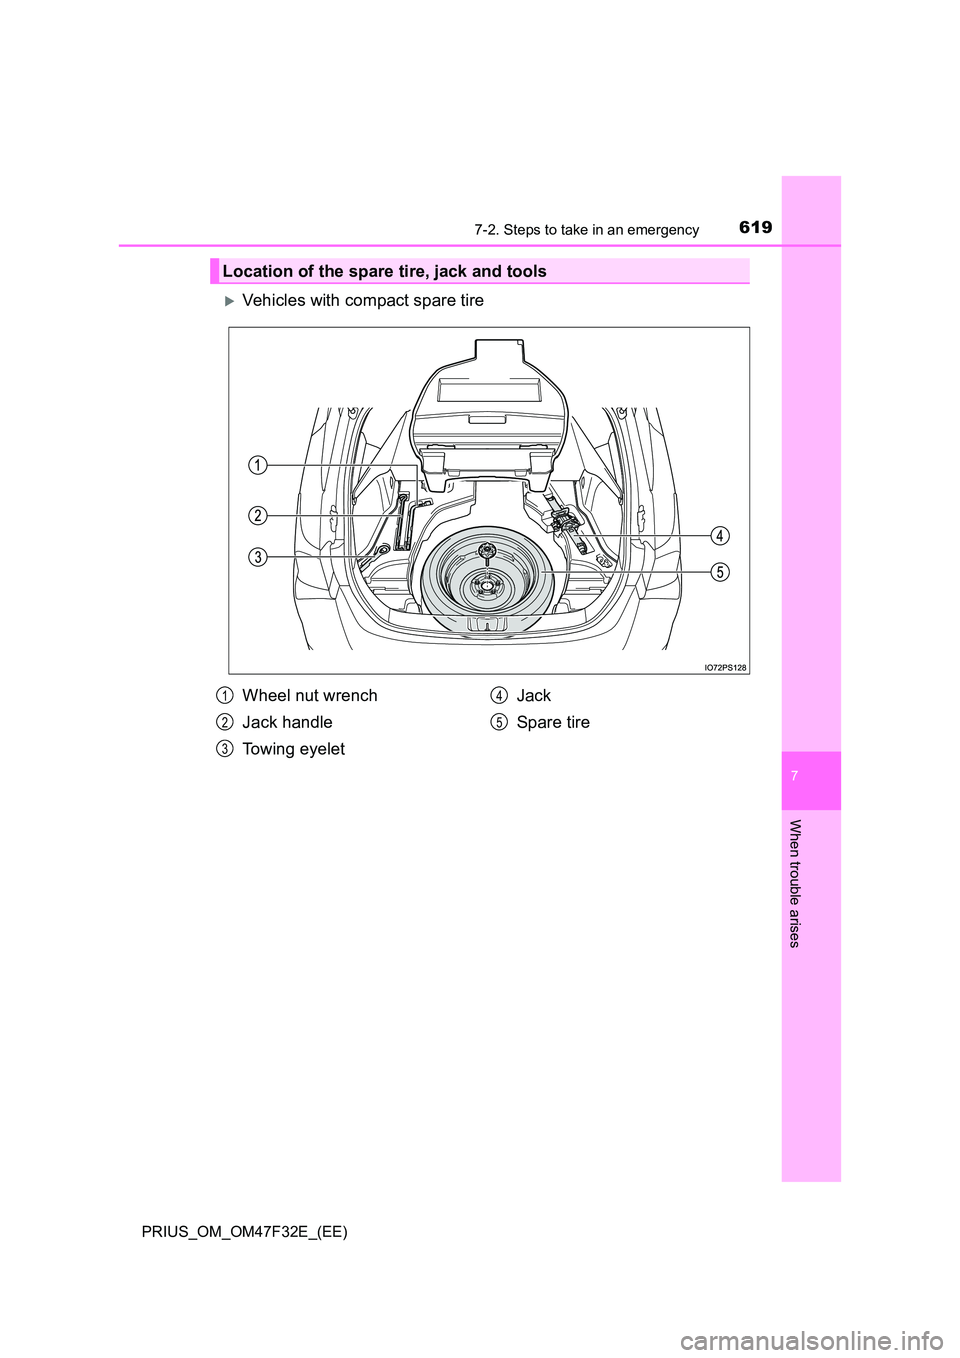 TOYOTA PRIUS 2023  Owners Manual 6197-2. Steps to take in an emergency
PRIUS_OM_OM47F32E_(EE)
7
When trouble arises
Vehicles with compact spare tire
Location of the spare tire, jack and tools
Wheel nut wrench 
Jack handle 
Towing 